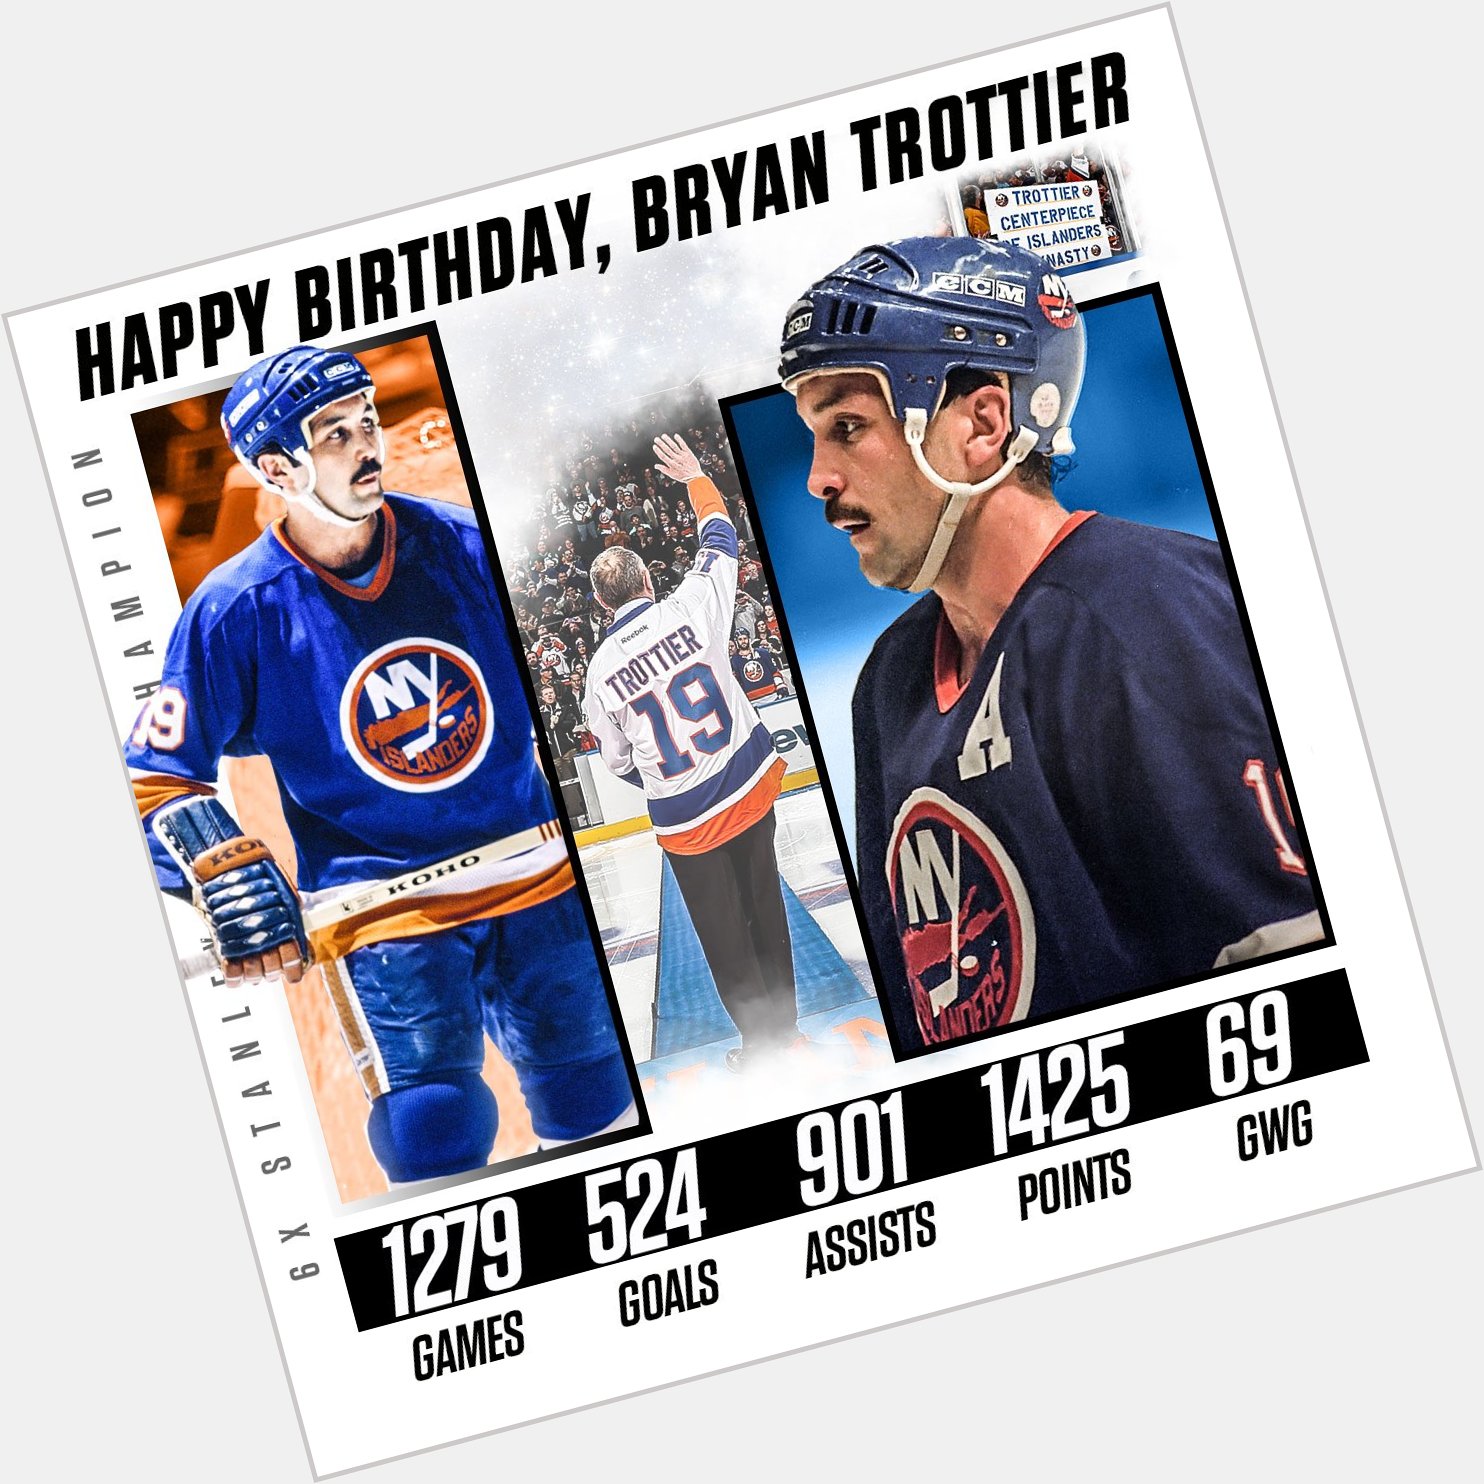 He played a BIG part in FOUR straight cups for the Happy Birthday, Bryan Trottier! 